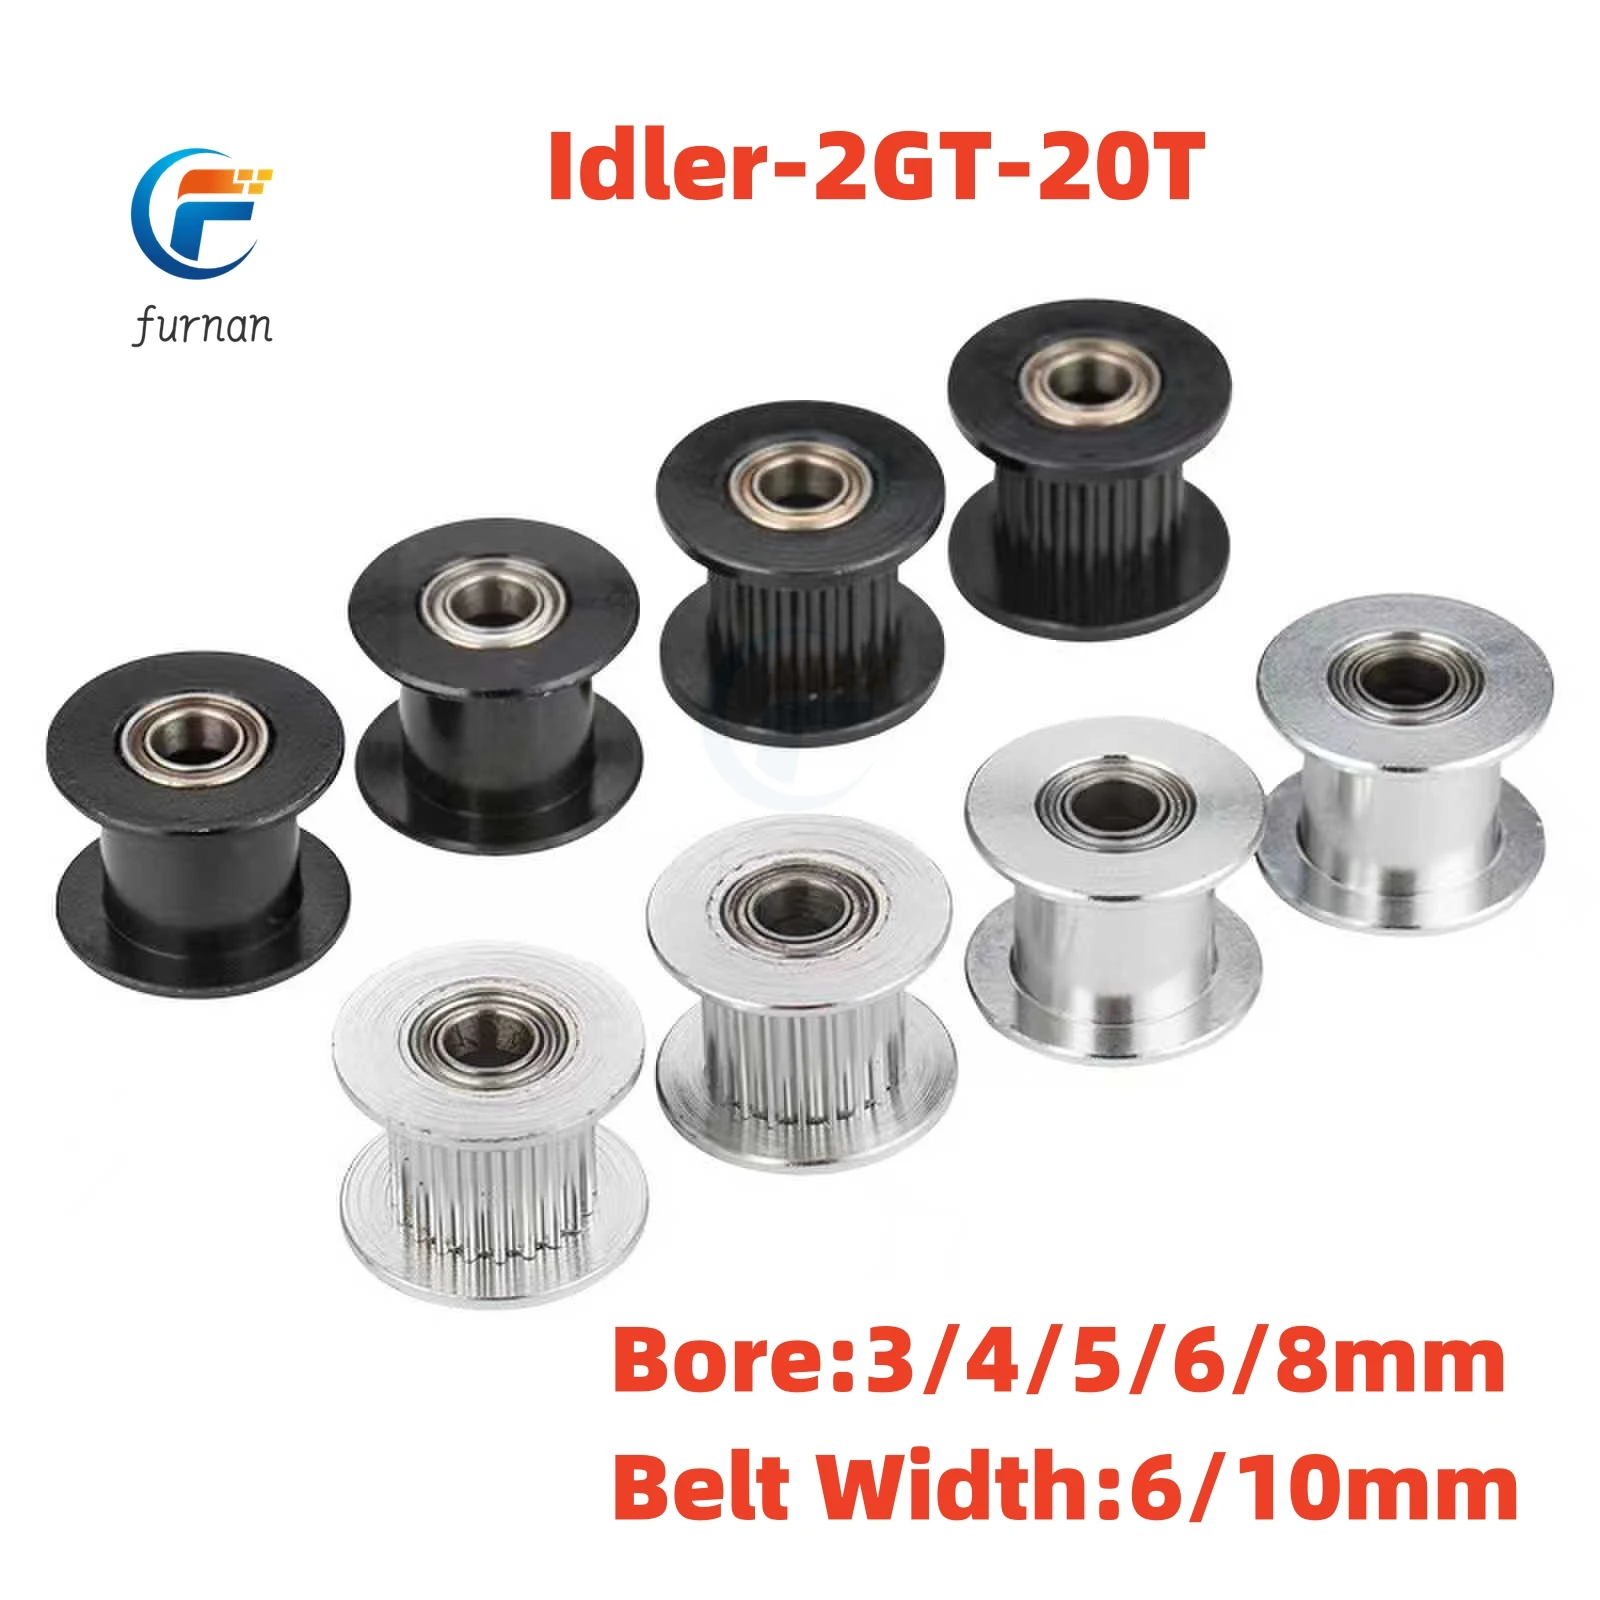 

20T 2GT Timing Pulley Bore3/4/5/6/8 for Width 6/10mm GT2 Synchronous Belt 3D Printer CNC Parts Idler Type Pitch 2mm